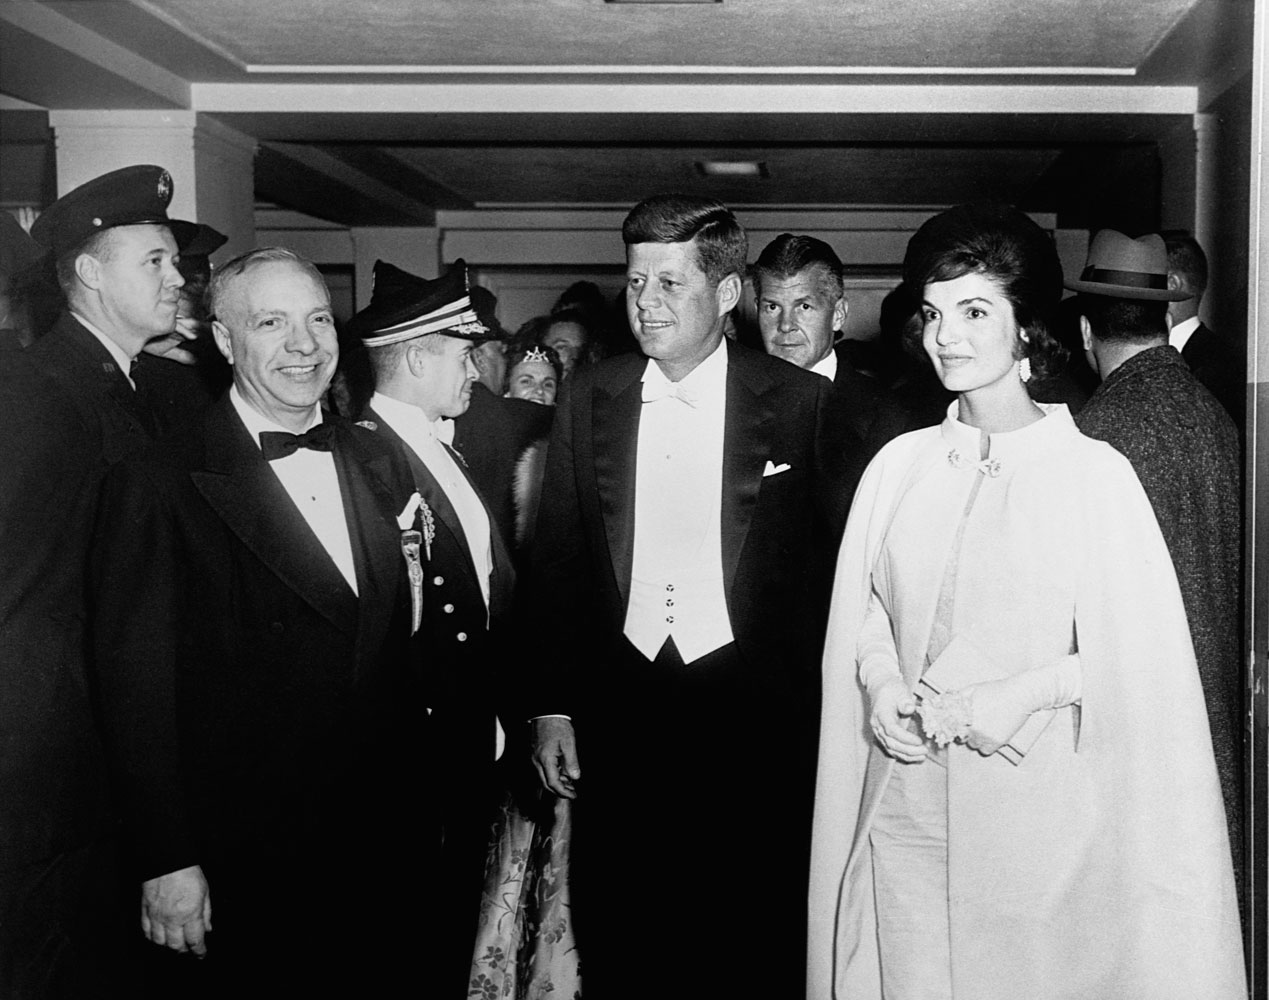 U.S. President John F. Kennedy and First Lady Jackie Kennedy at the Inaugural Ball on Jan. 20, 1961 in Washington, D.C.